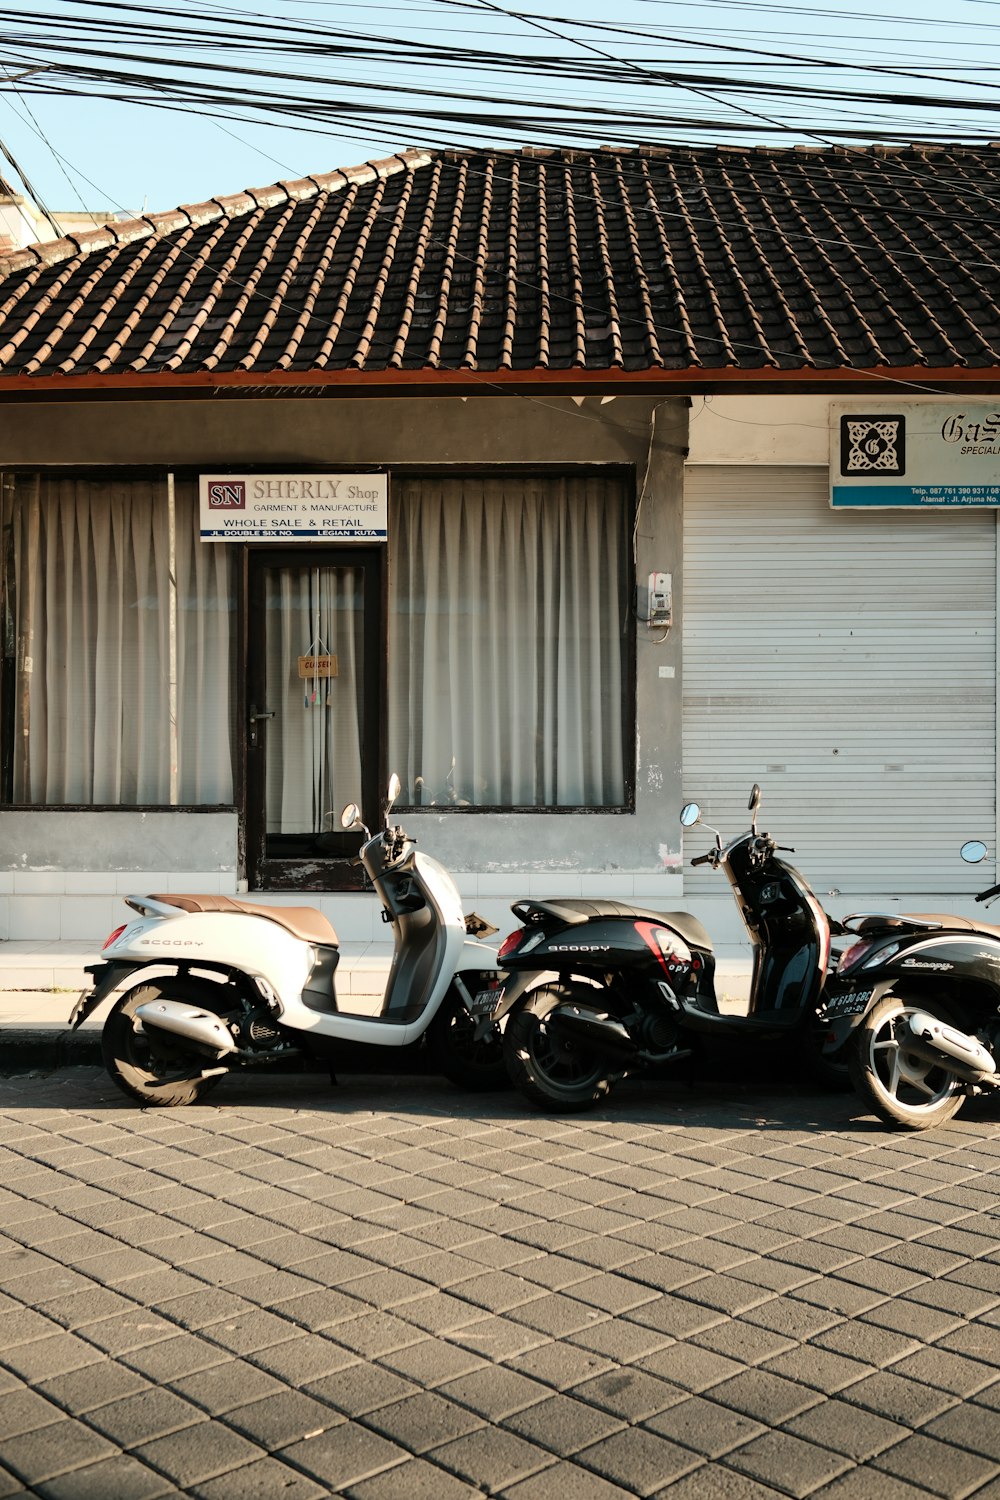 two motorcycles parked in front of a building